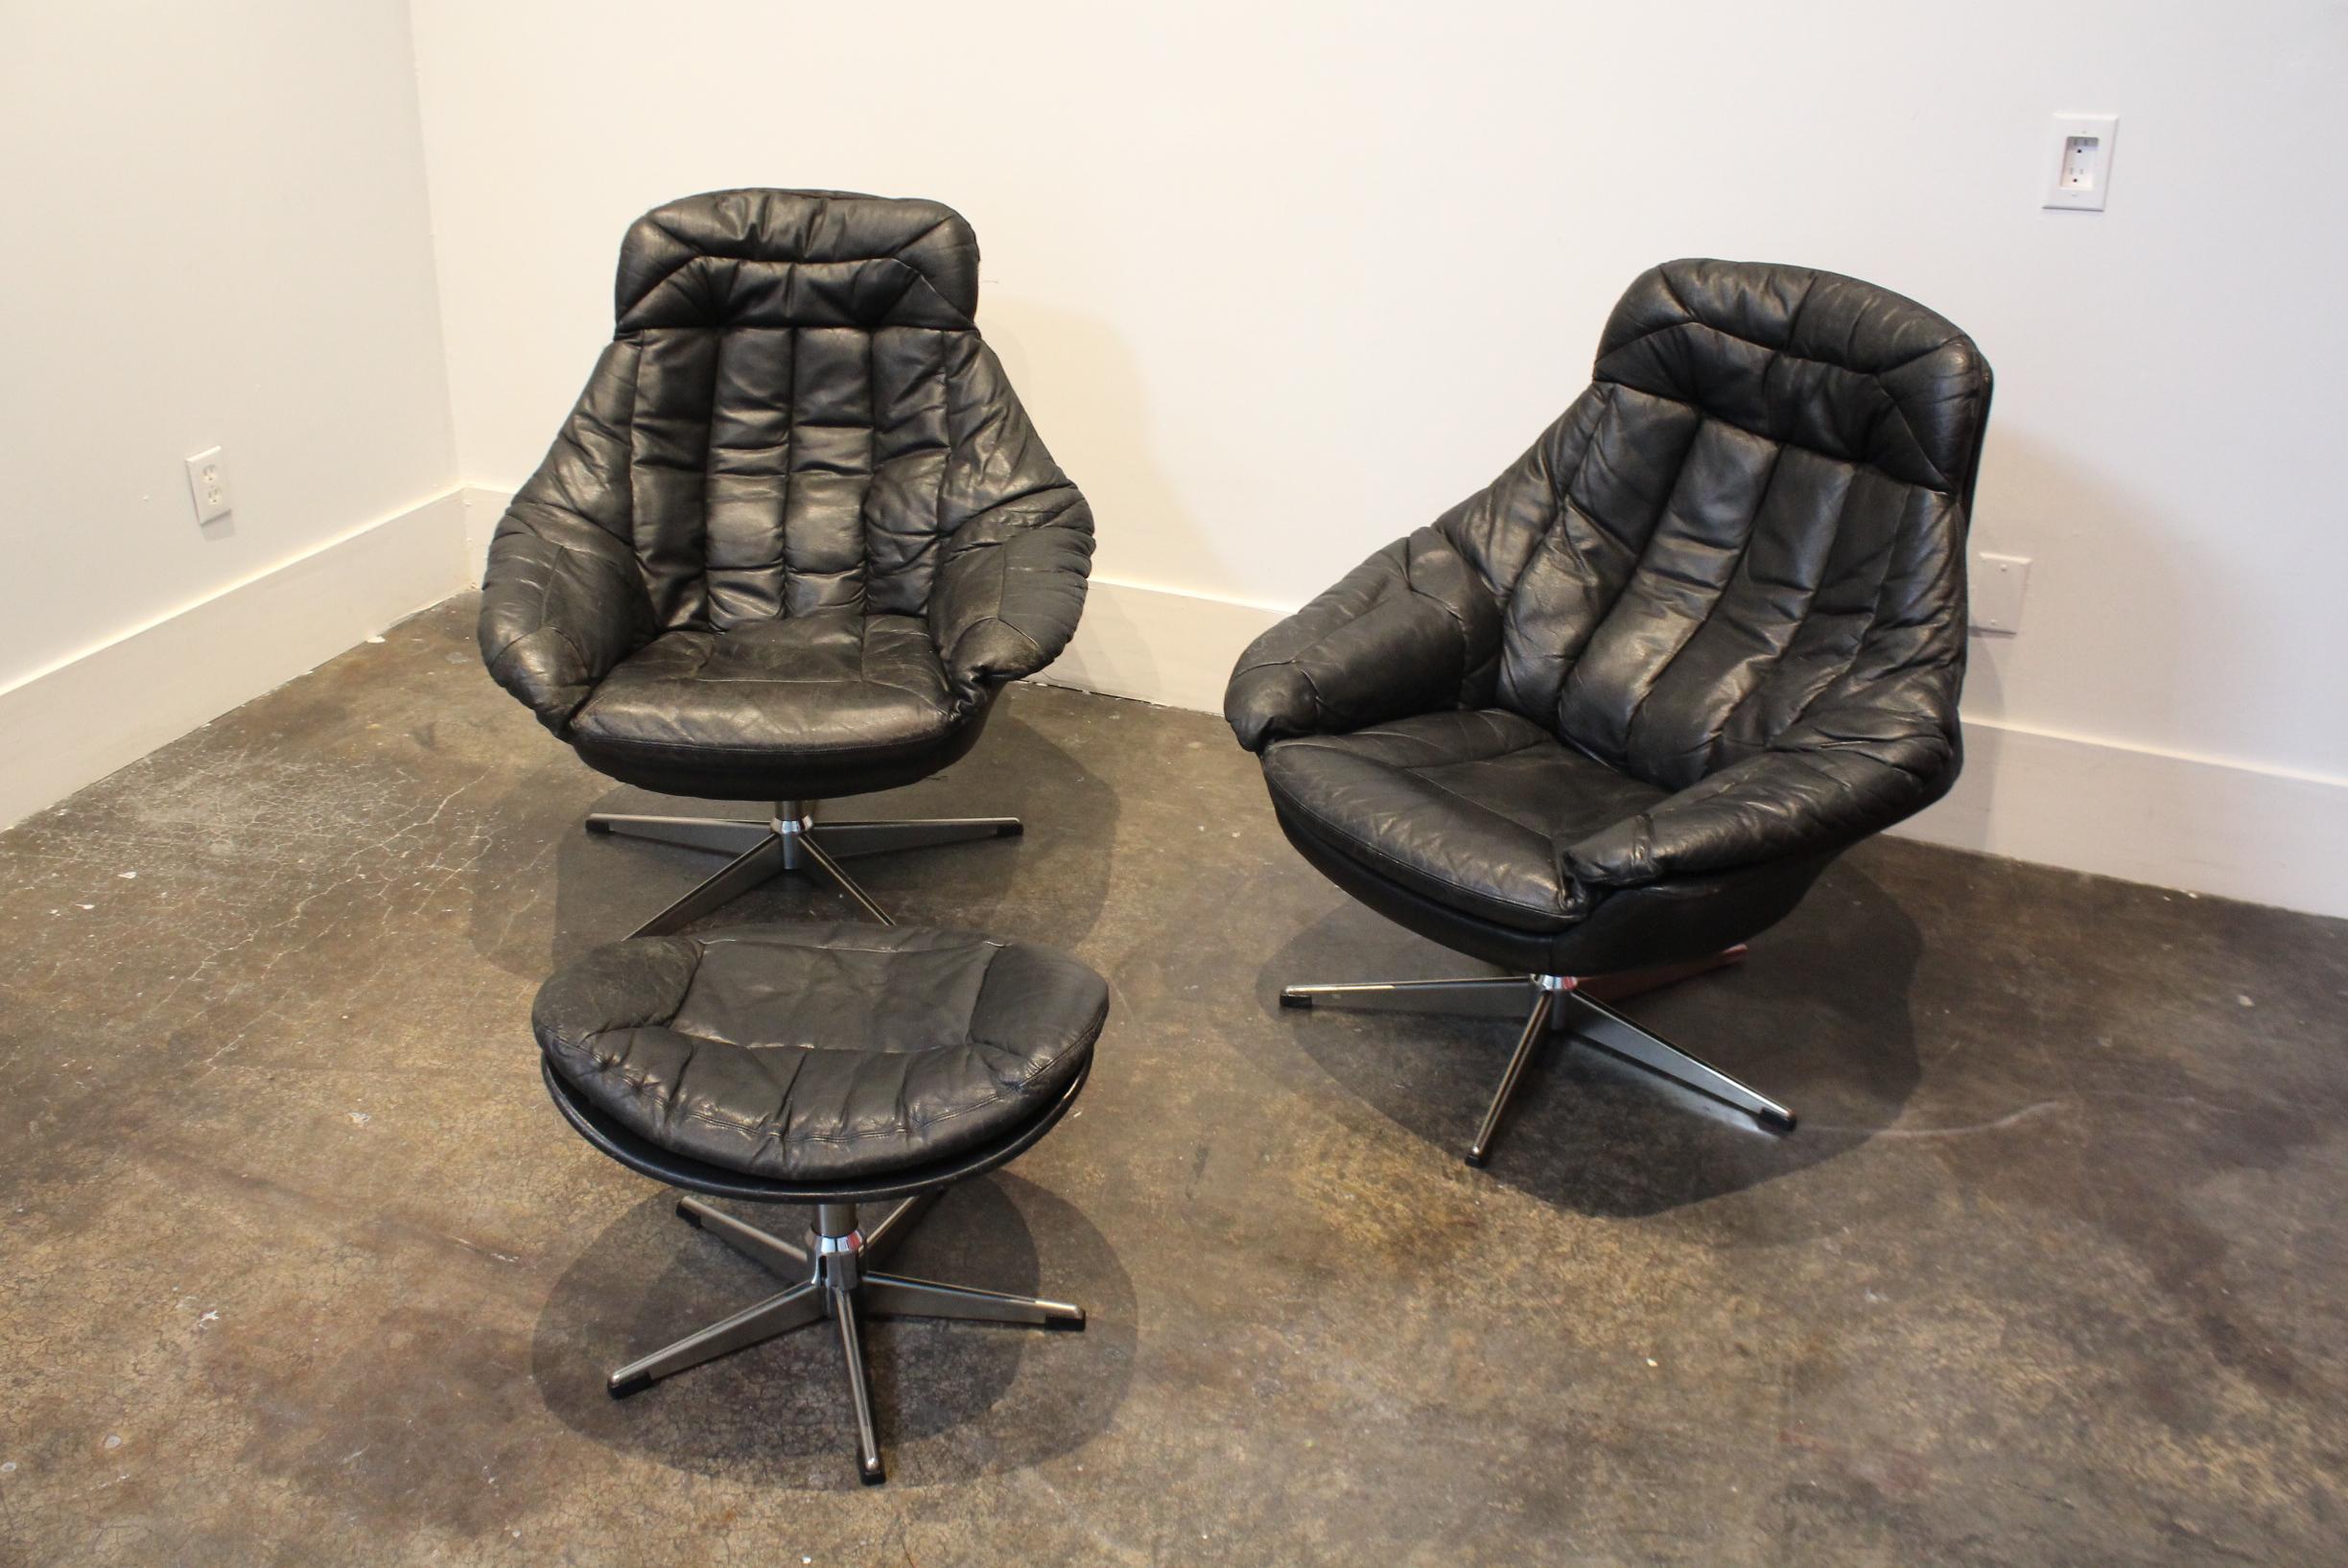 Beautifully-designed, 1970s swivel lounge chairs fully wrapped in black, leather jacket-style leather. In good condition with beautiful wear/light crackling/patina to leather but no major damage or holes. Feet are metal/chrome with very light